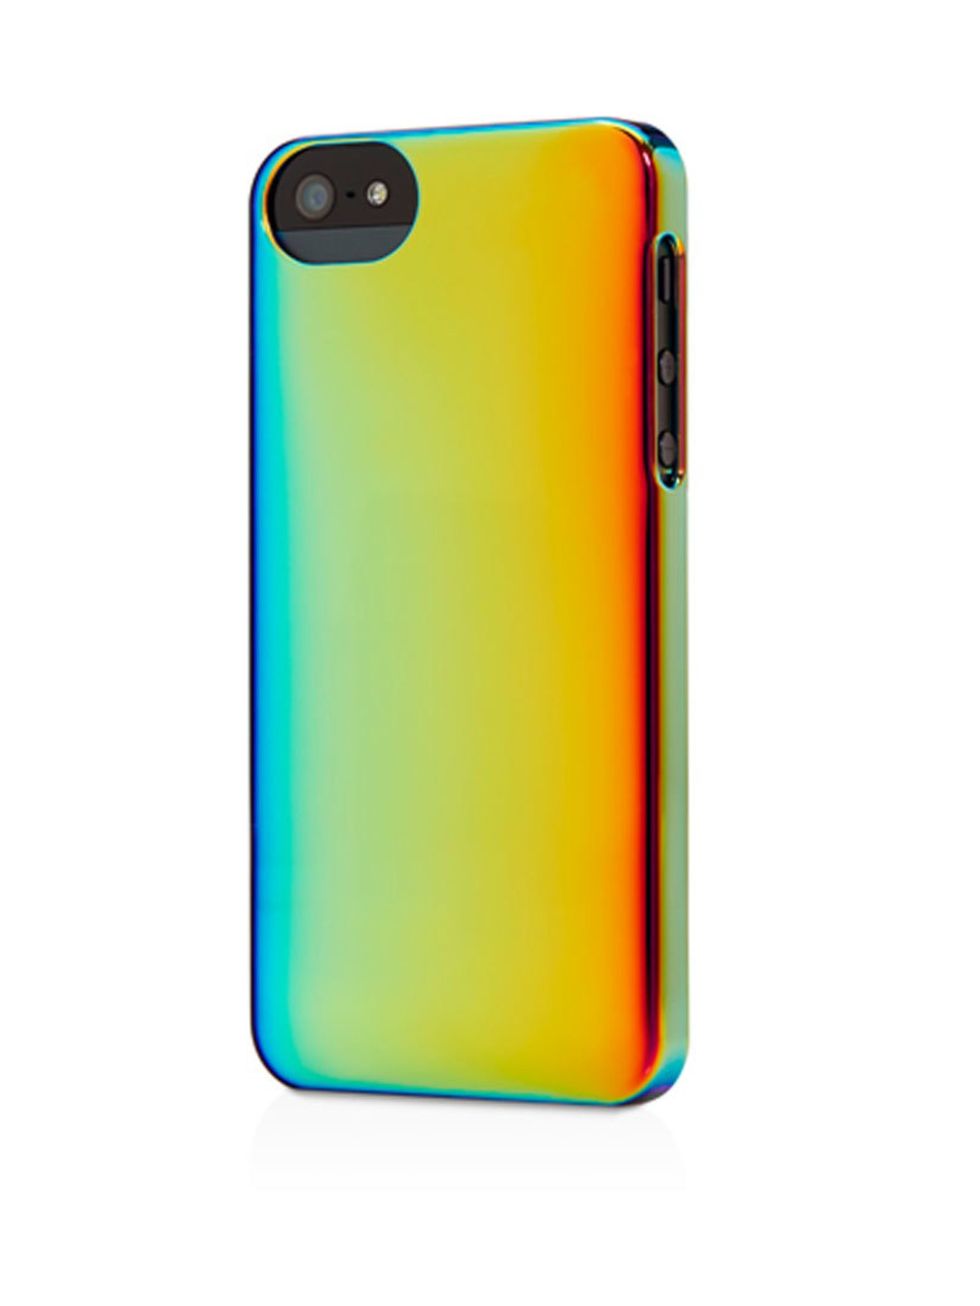 <p>Precious metallics . . </p><p>Iridescent metallic iPhone 5 cover £24.95 from <a href="http://store.apple.com/uk/product/HC374ZM/A/adopted-iridescent-case-for-iphone-5?fnode=47">Apple</a></p>